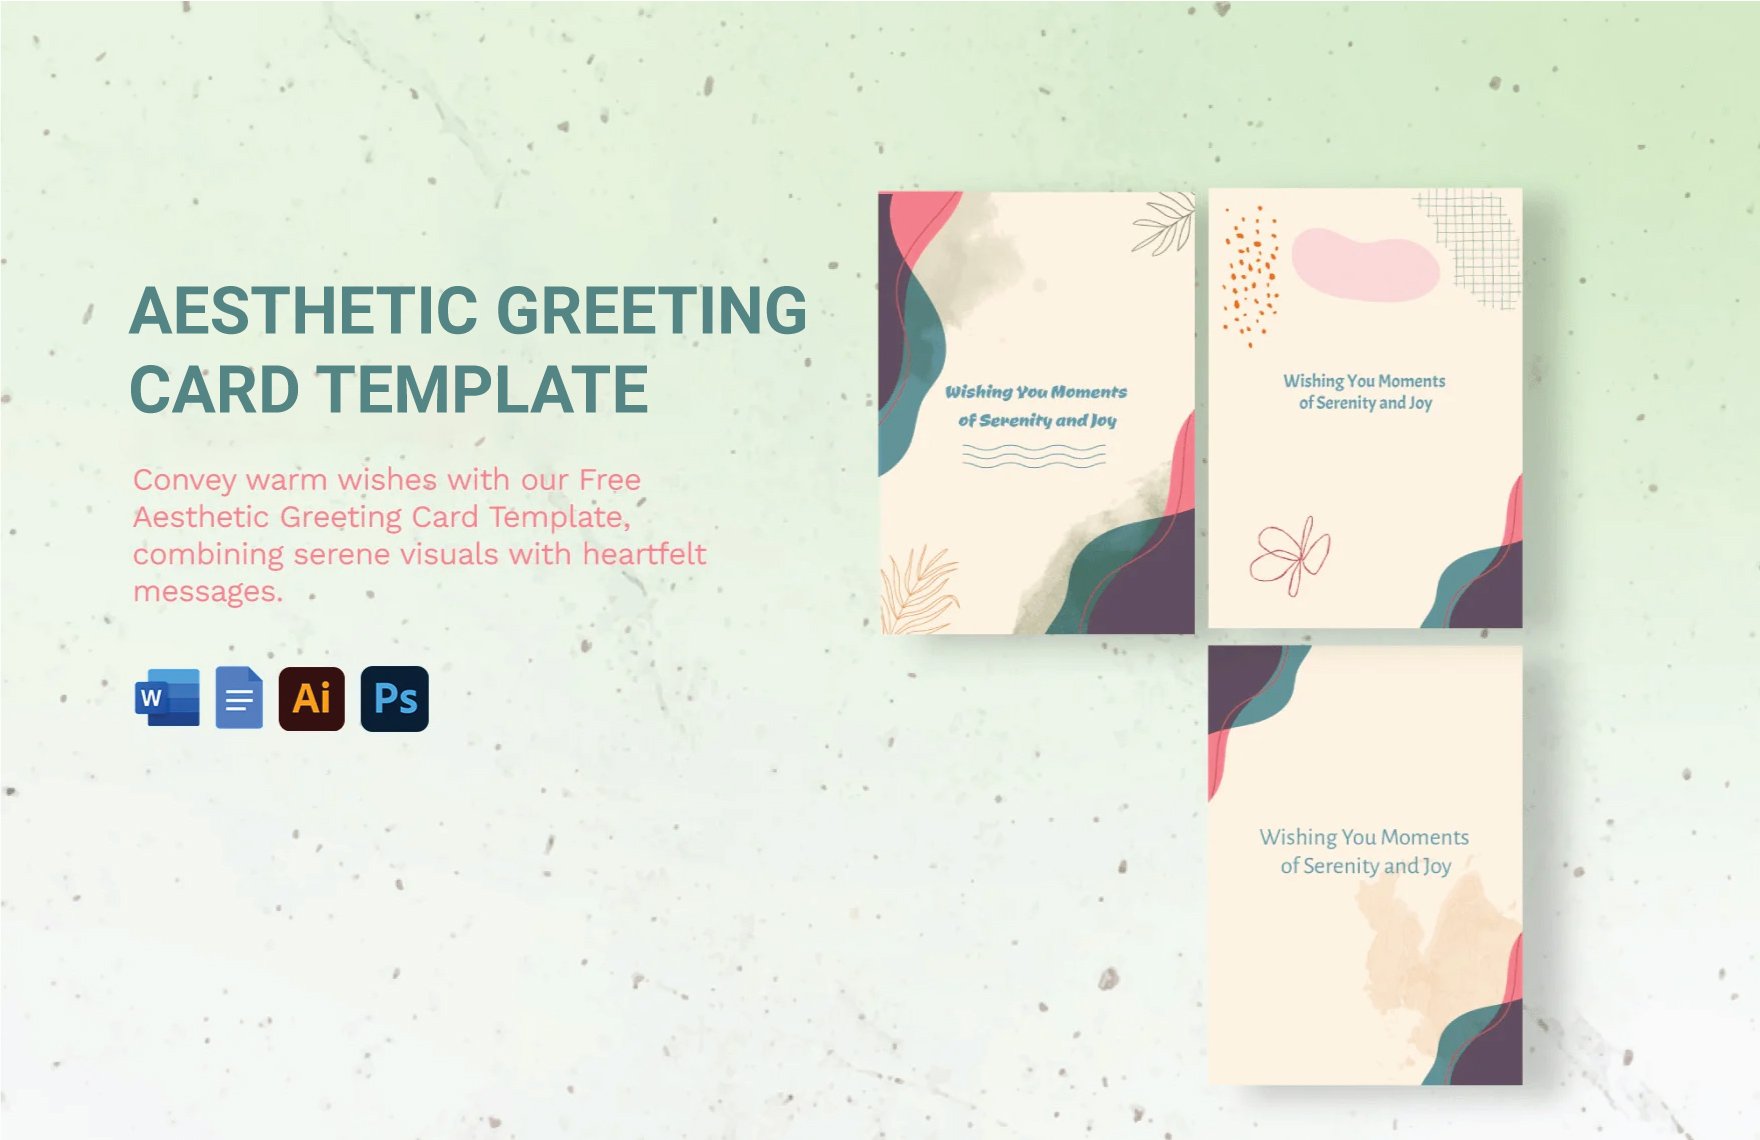 Free Aesthetic Greeting Card Template in Word, Google Docs, Illustrator, PSD